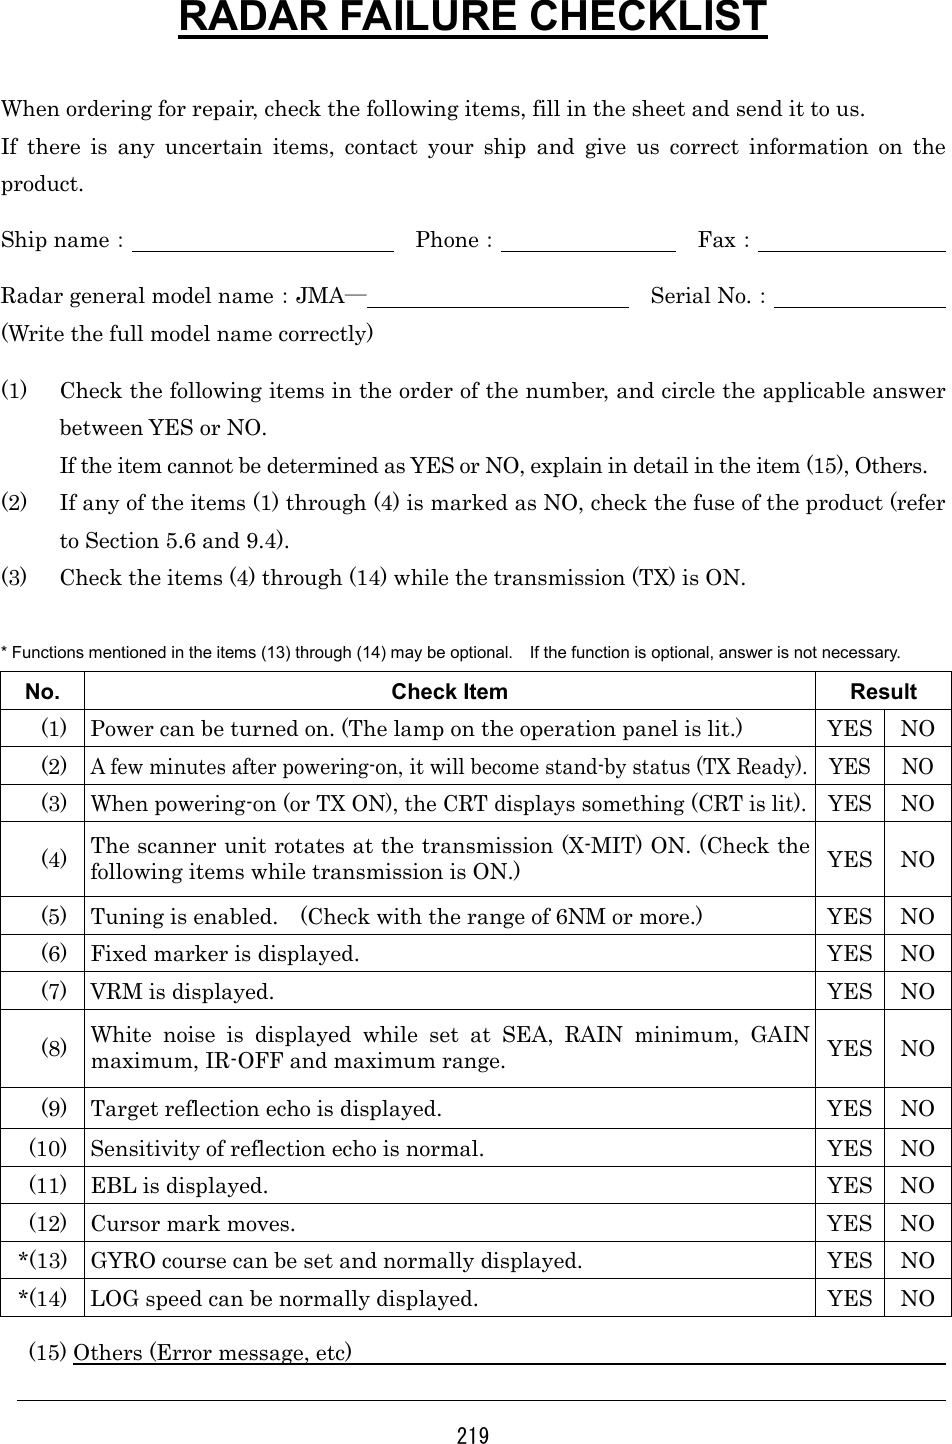 219 RADAR FAILURE CHECKLIST  When ordering for repair, check the following items, fill in the sheet and send it to us.   If there is any uncertain items, contact your ship and give us correct information on the product. Ship name：             Phone：         Fax：          Radar general model name：JMA―             Serial No.：         (Write the full model name correctly) (1)  Check the following items in the order of the number, and circle the applicable answer between YES or NO.   If the item cannot be determined as YES or NO, explain in detail in the item (15), Others. (2)  If any of the items (1) through (4) is marked as NO, check the fuse of the product (refer to Section 5.6 and 9.4). (3)  Check the items (4) through (14) while the transmission (TX) is ON.  * Functions mentioned in the items (13) through (14) may be optional.    If the function is optional, answer is not necessary. No. Check Item  Result   (1)  Power can be turned on. (The lamp on the operation panel is lit.)  YES  NO  (2) A few minutes after powering-on, it will become stand-by status (TX Ready).  YES  NO  (3) When powering-on (or TX ON), the CRT displays something (CRT is lit).  YES  NO  (4)  The scanner unit rotates at the transmission (X-MIT) ON. (Check the following items while transmission is ON.)  YES NO   (5)  Tuning is enabled.    (Check with the range of 6NM or more.)  YES  NO   (6)  Fixed marker is displayed.  YES  NO   (7)  VRM is displayed.  YES  NO  (8)  White noise is displayed while set at SEA, RAIN minimum, GAIN maximum, IR-OFF and maximum range.  YES NO   (9)  Target reflection echo is displayed.  YES  NO (10)  Sensitivity of reflection echo is normal.  YES  NO (11)  EBL is displayed.  YES  NO (12)  Cursor mark moves.  YES  NO *(13)  GYRO course can be set and normally displayed.  YES  NO *(14)  LOG speed can be normally displayed.  YES  NO   (15) Others (Error message, etc)                                                                        